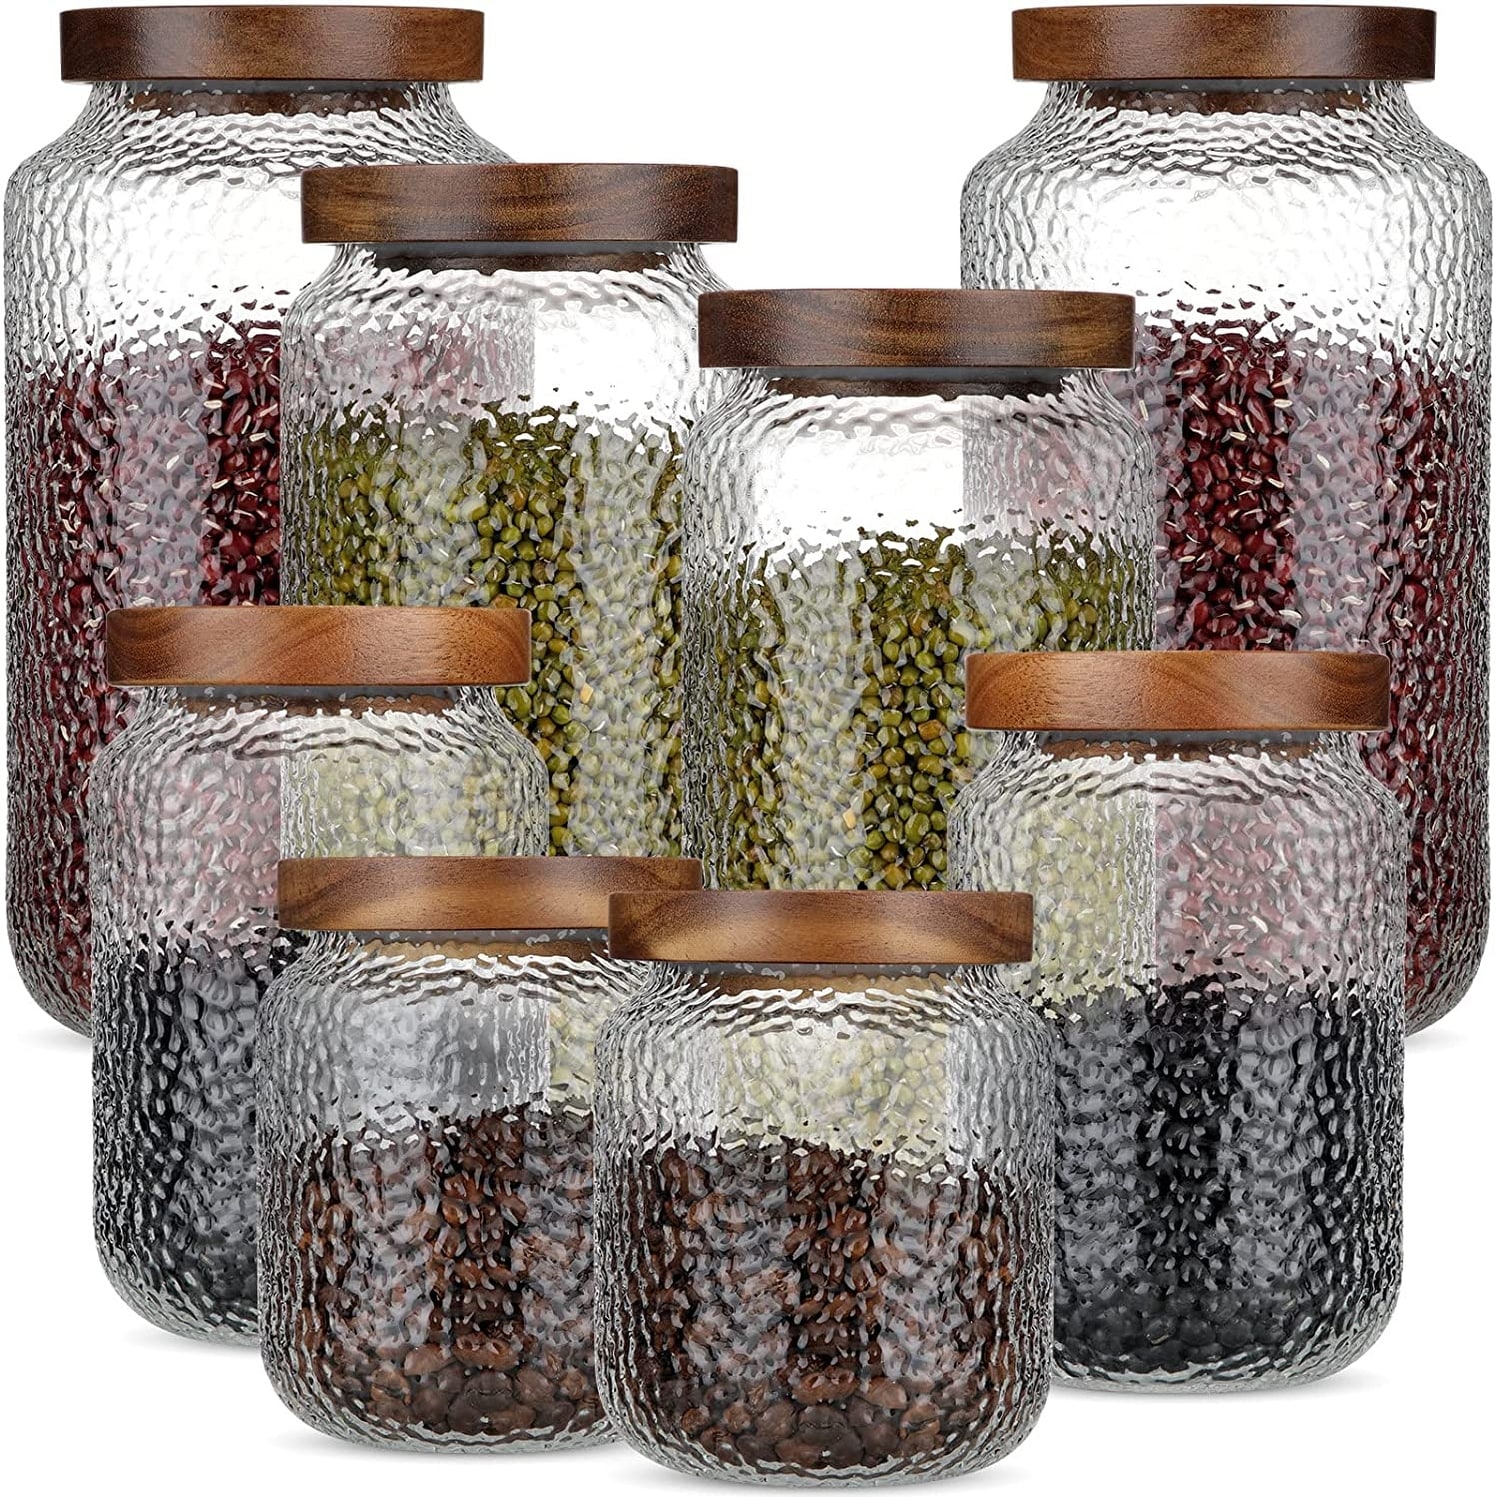 https://ak1.ostkcdn.com/images/products/is/images/direct/efed5233eee5e071de4163cfbb2840bb70e1d296/8-Pcs-Glass-Storage-Jar-with-Airtight-Wood-Lid-Anti-Slip-Food-Storage-Container-%2C-Kitchen-Glass-Canisters.jpg